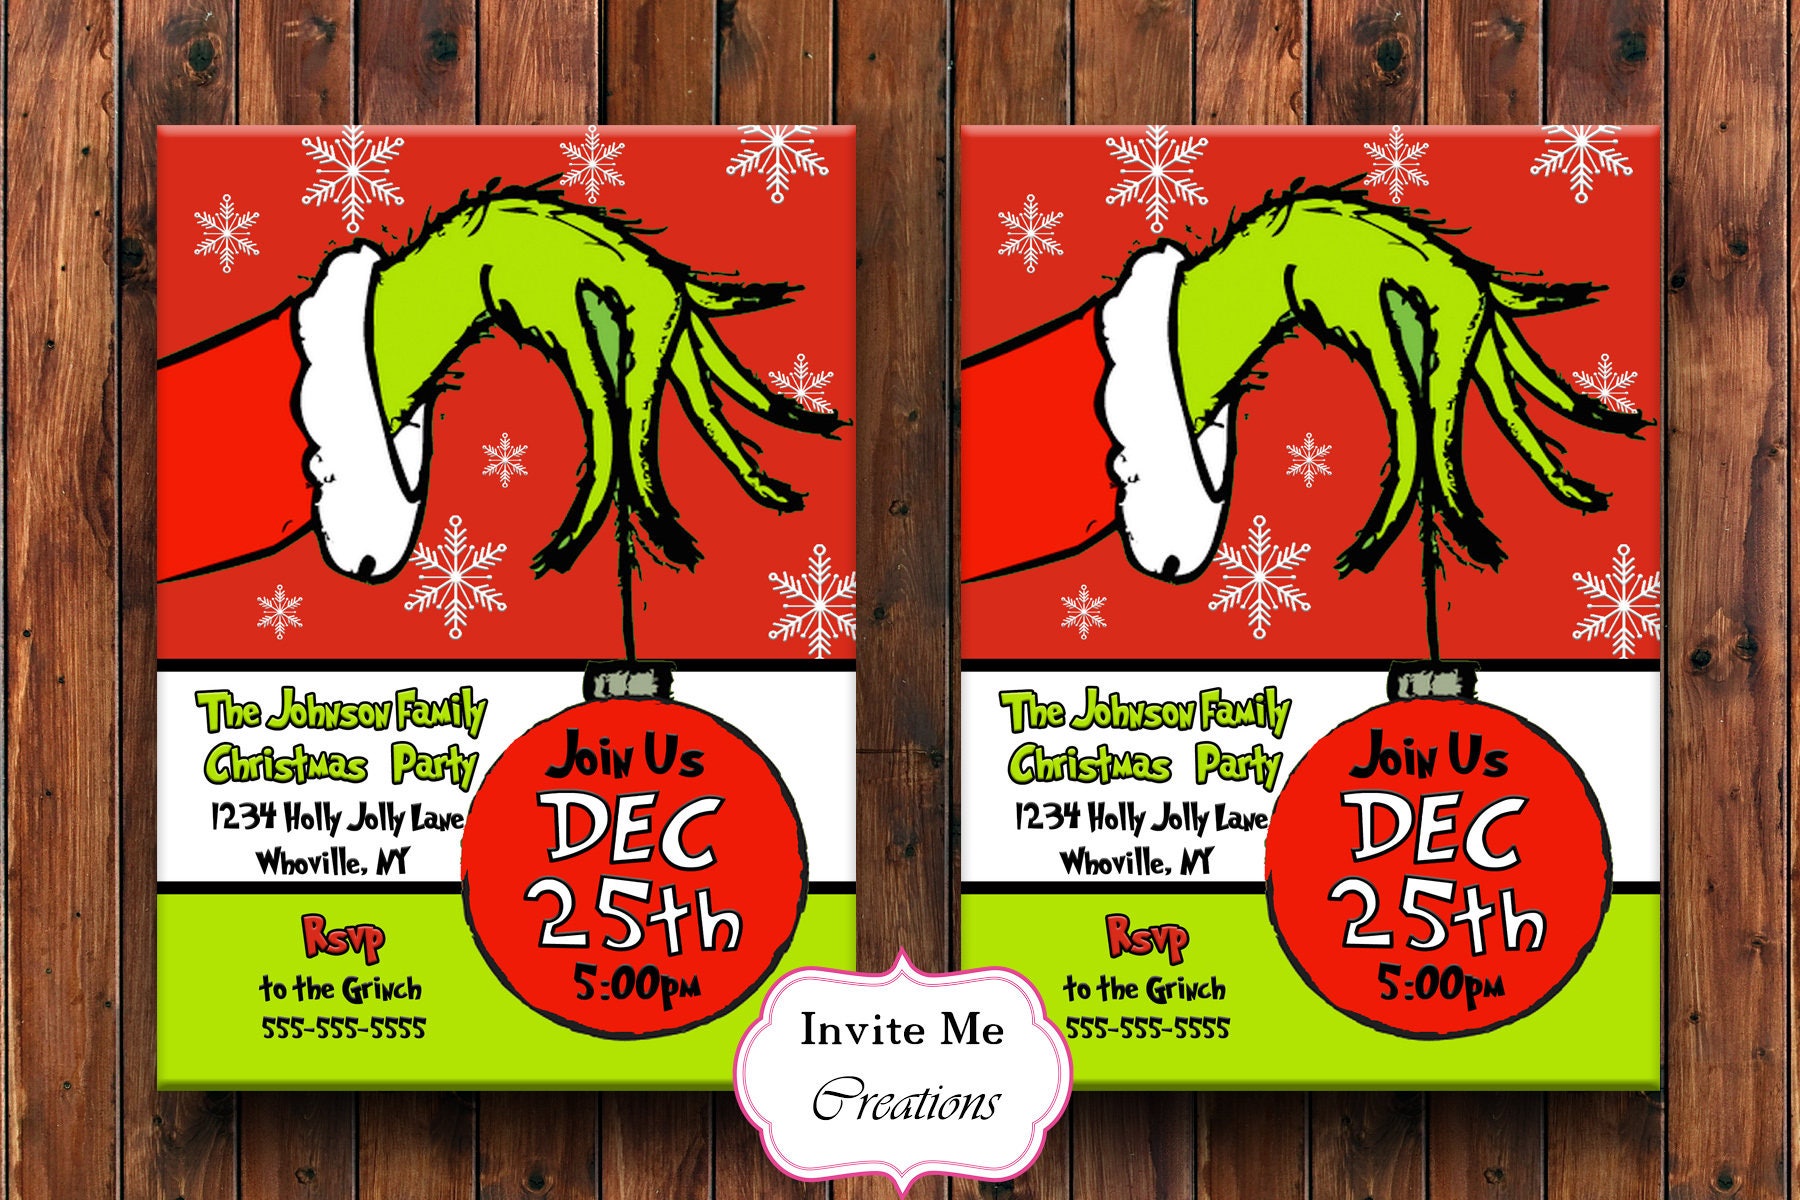 grinch-invitation-the-grinch-holiday-invite-grinch-christmas